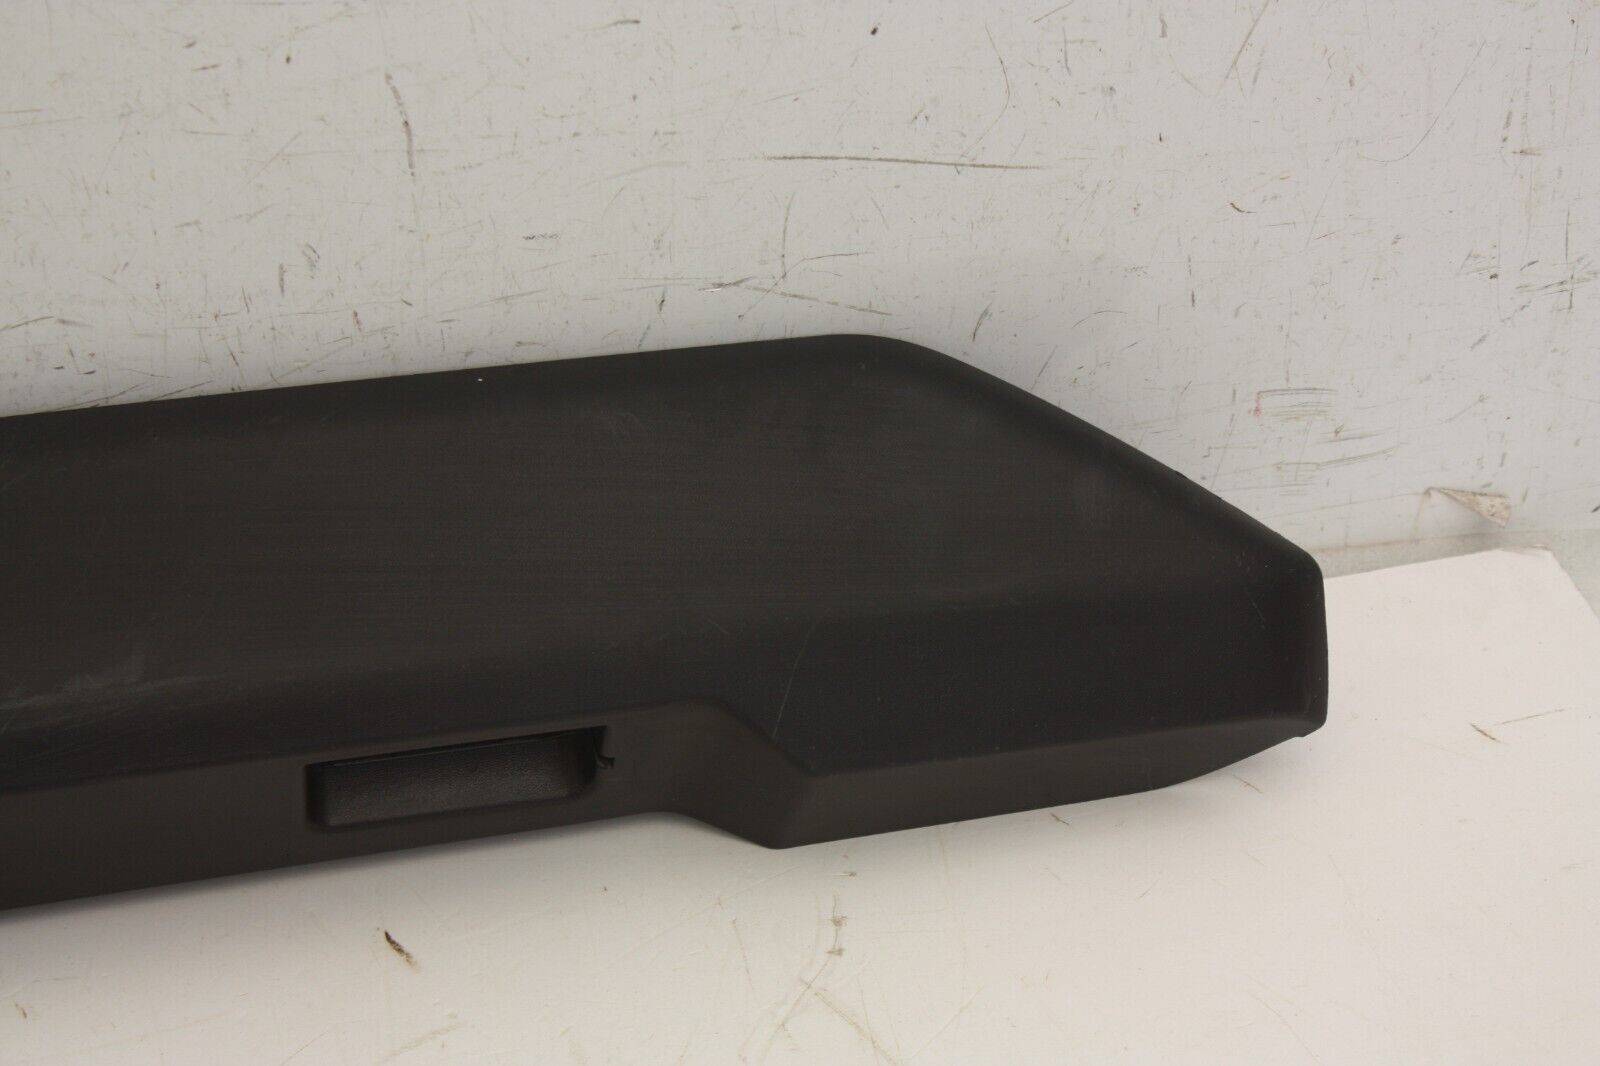 Ford-Transit-Custom-Tailgate-Lid-Cover-Recording-Bar-2018-ON-BK21-13555-AFW-176302846649-2